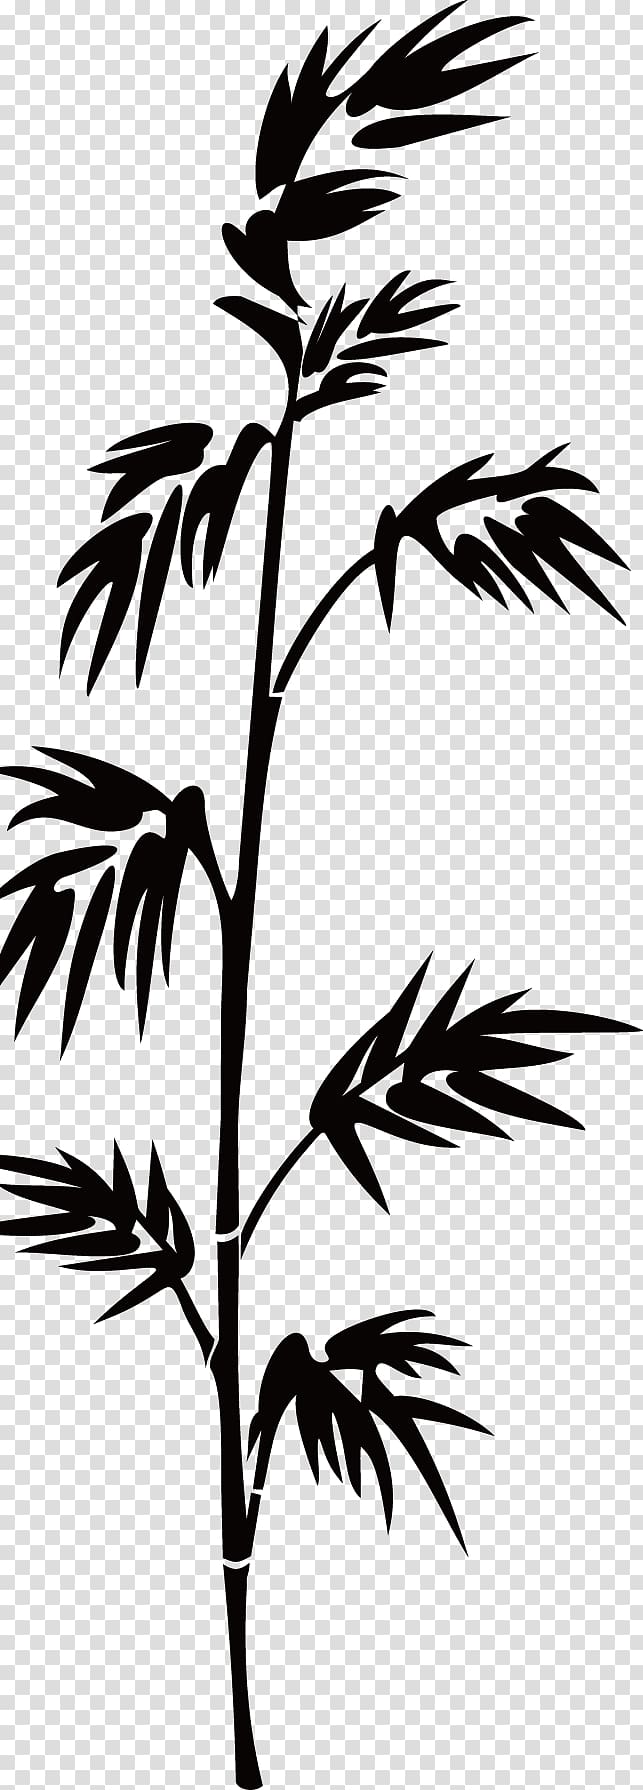 Bamboo Silhouette Bamboe, Black Bamboo Silhouette transparent background PNG clipart